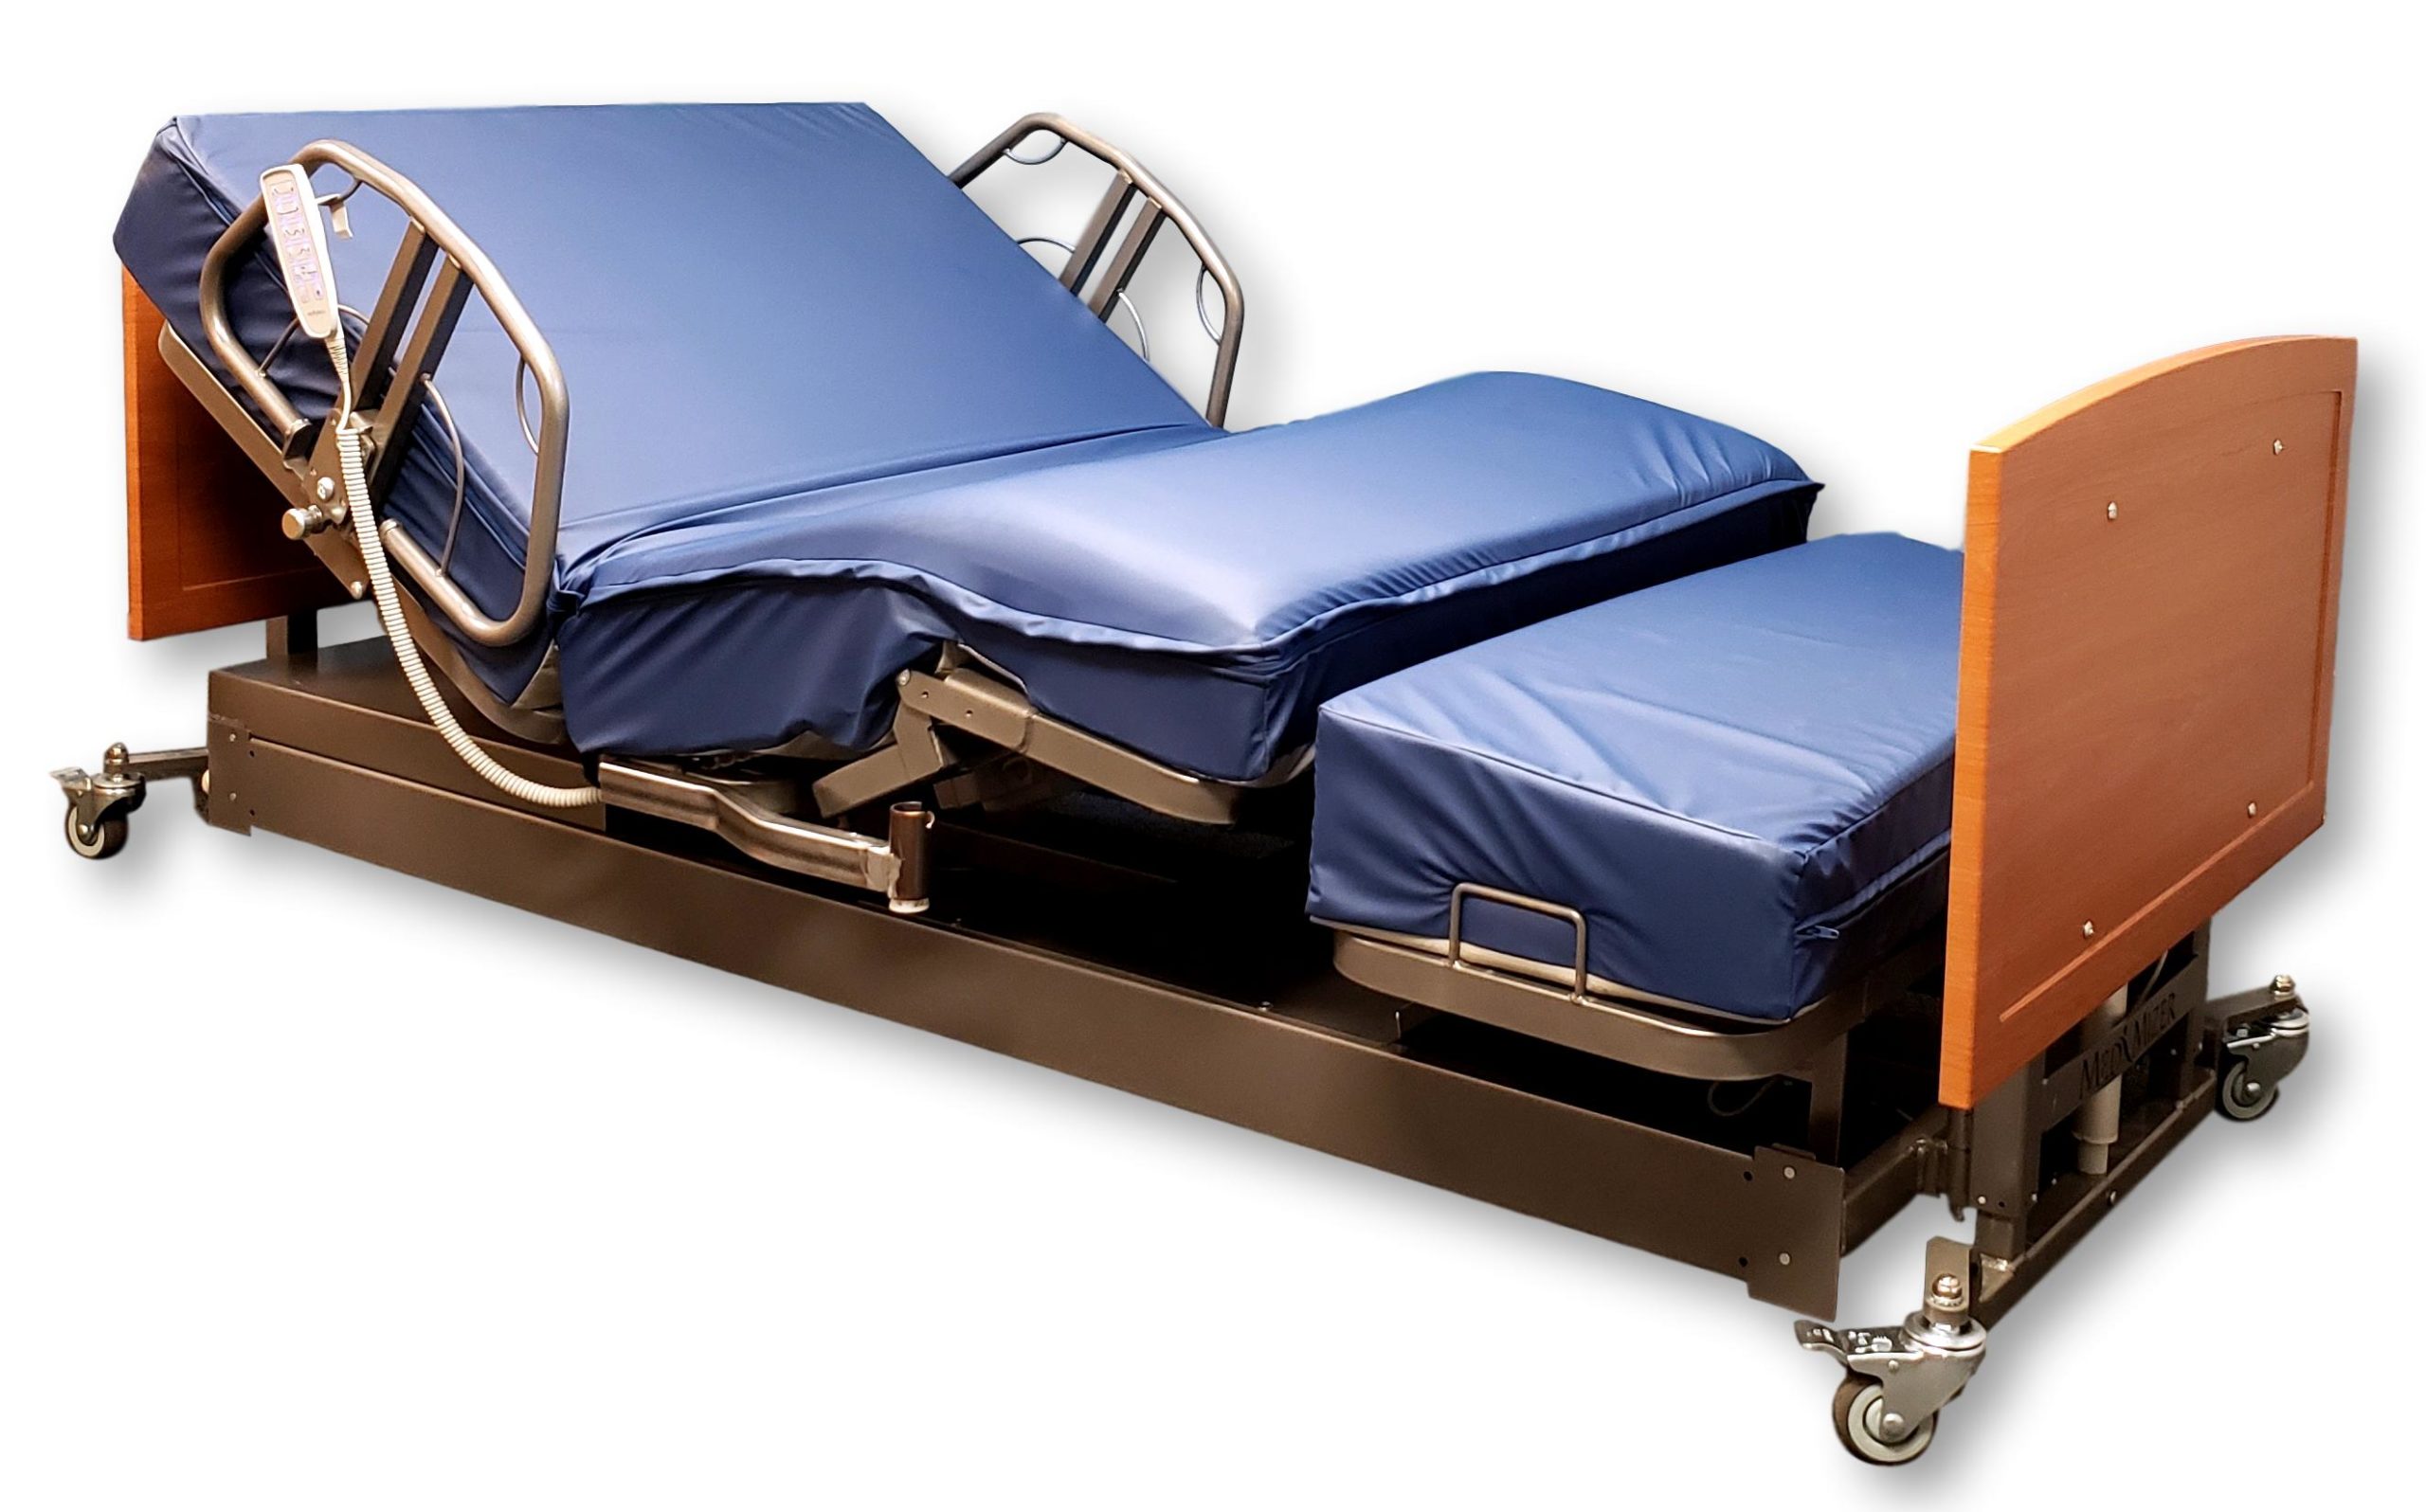 Image of a hospital bed product on white background.